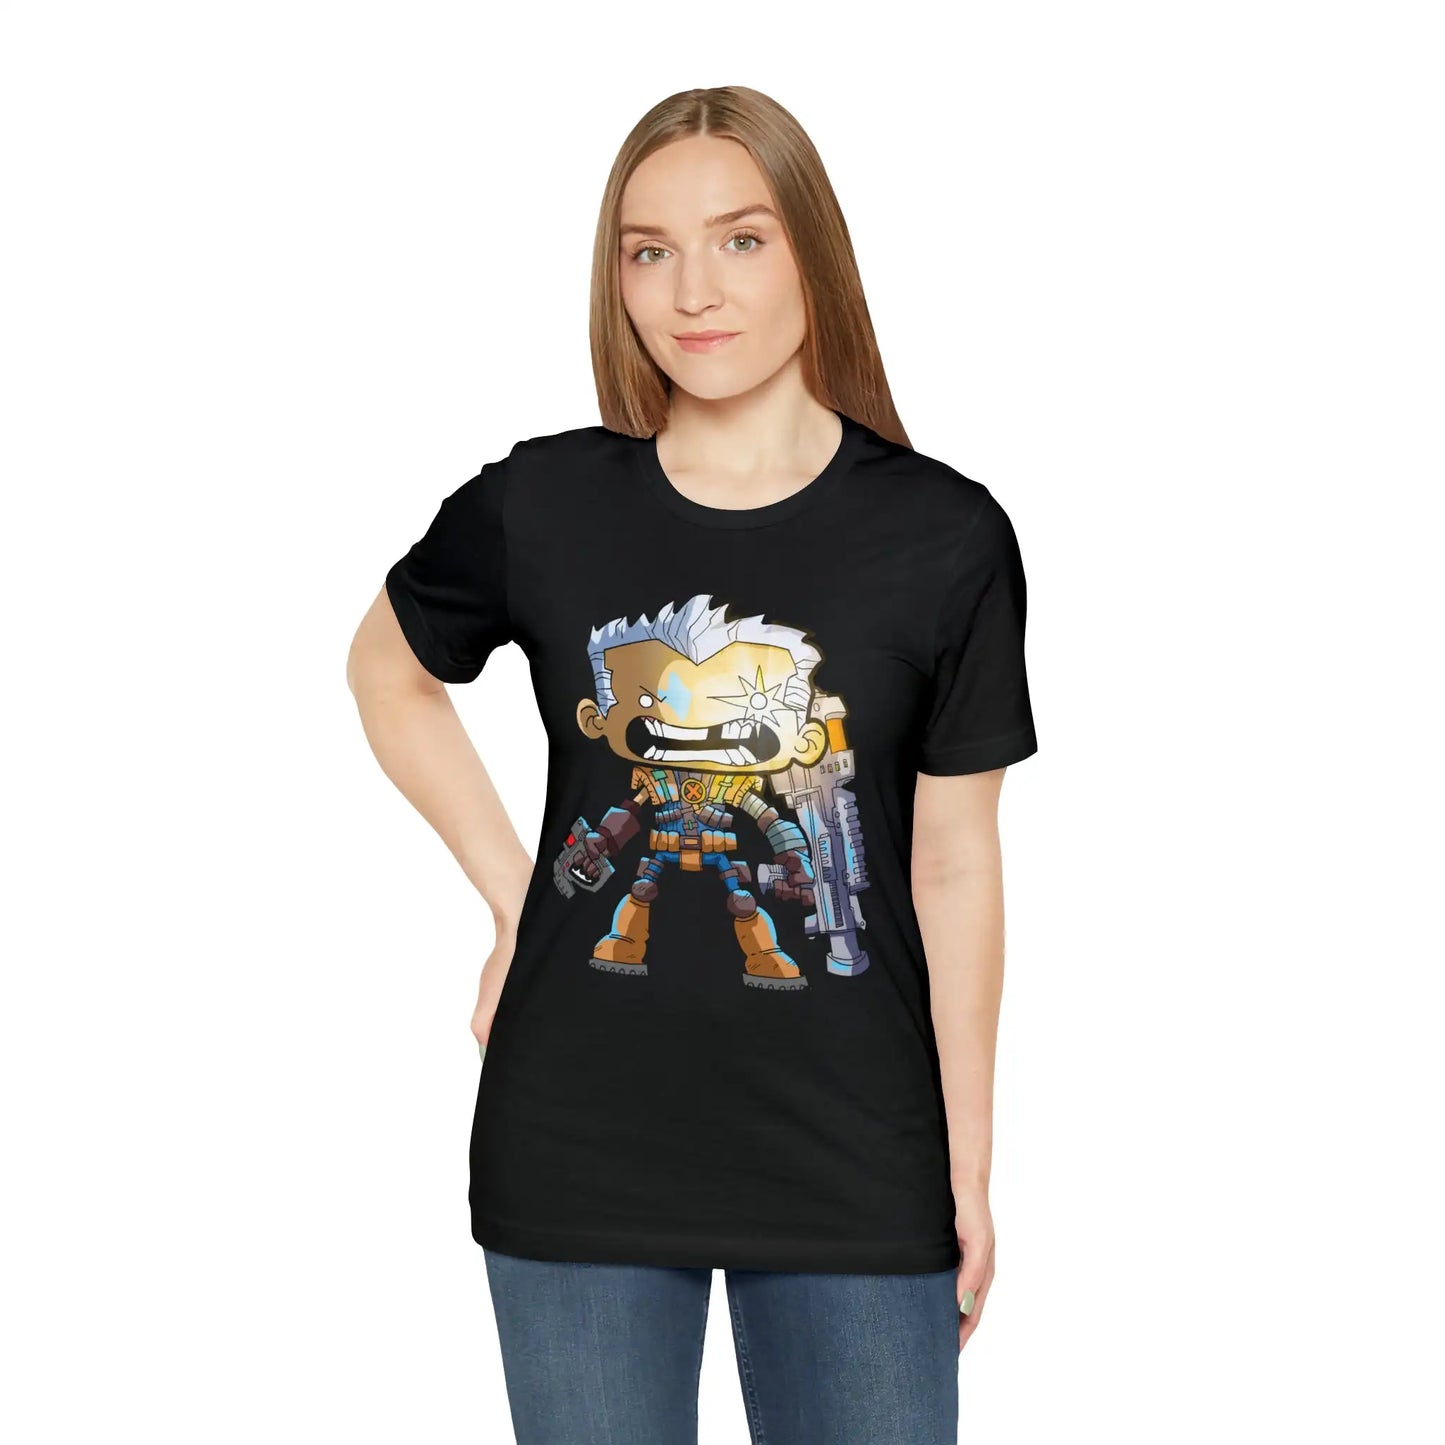 Cable X-Force X-Men T-Shirt Cartoon Gift Tee Unisex For Men and Women